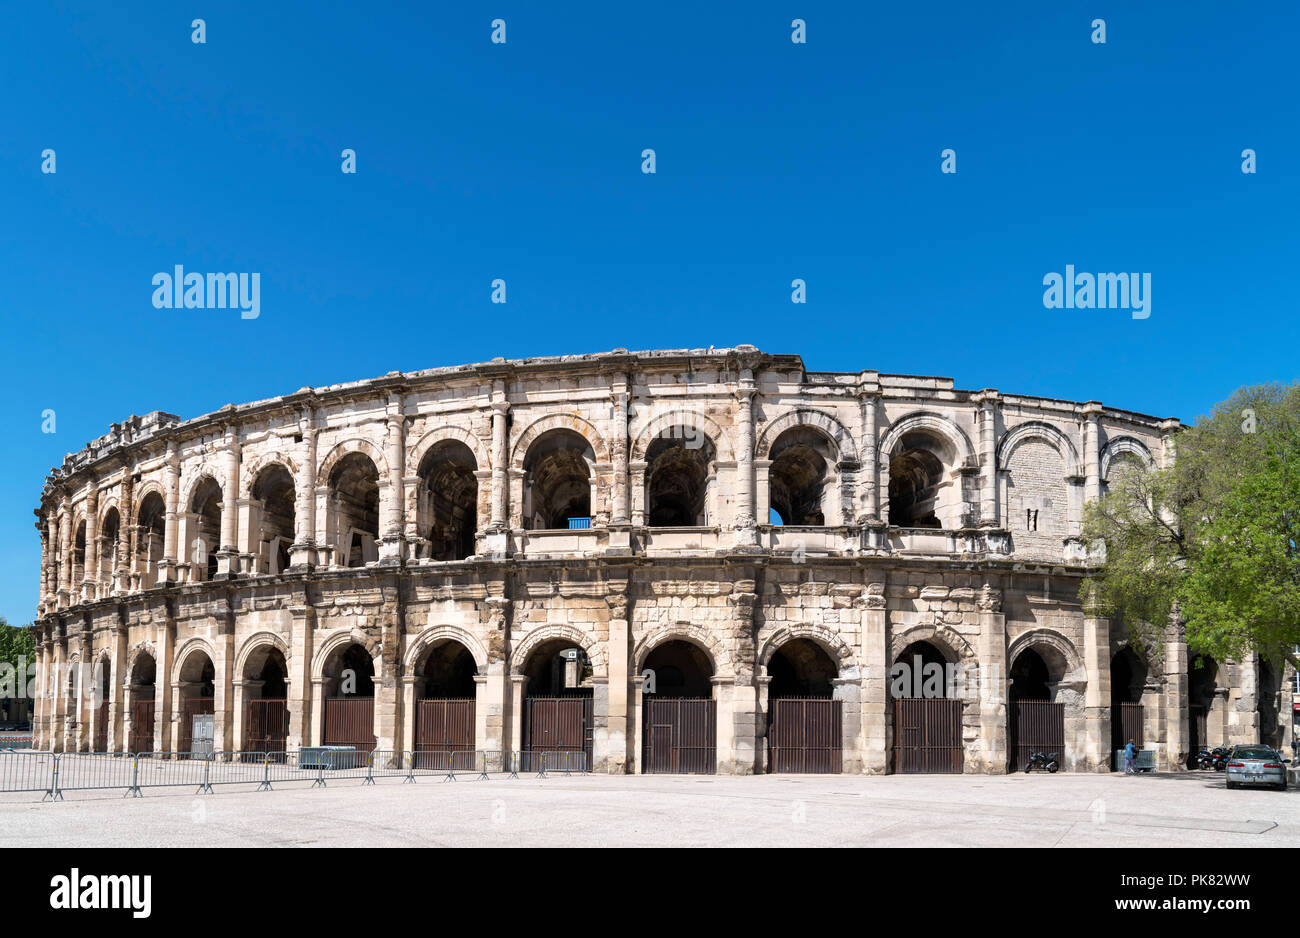 Les Arenes, the 1st century Roman amphitheatre in the city centre, Nimes, Languedoc, France Stock Photo